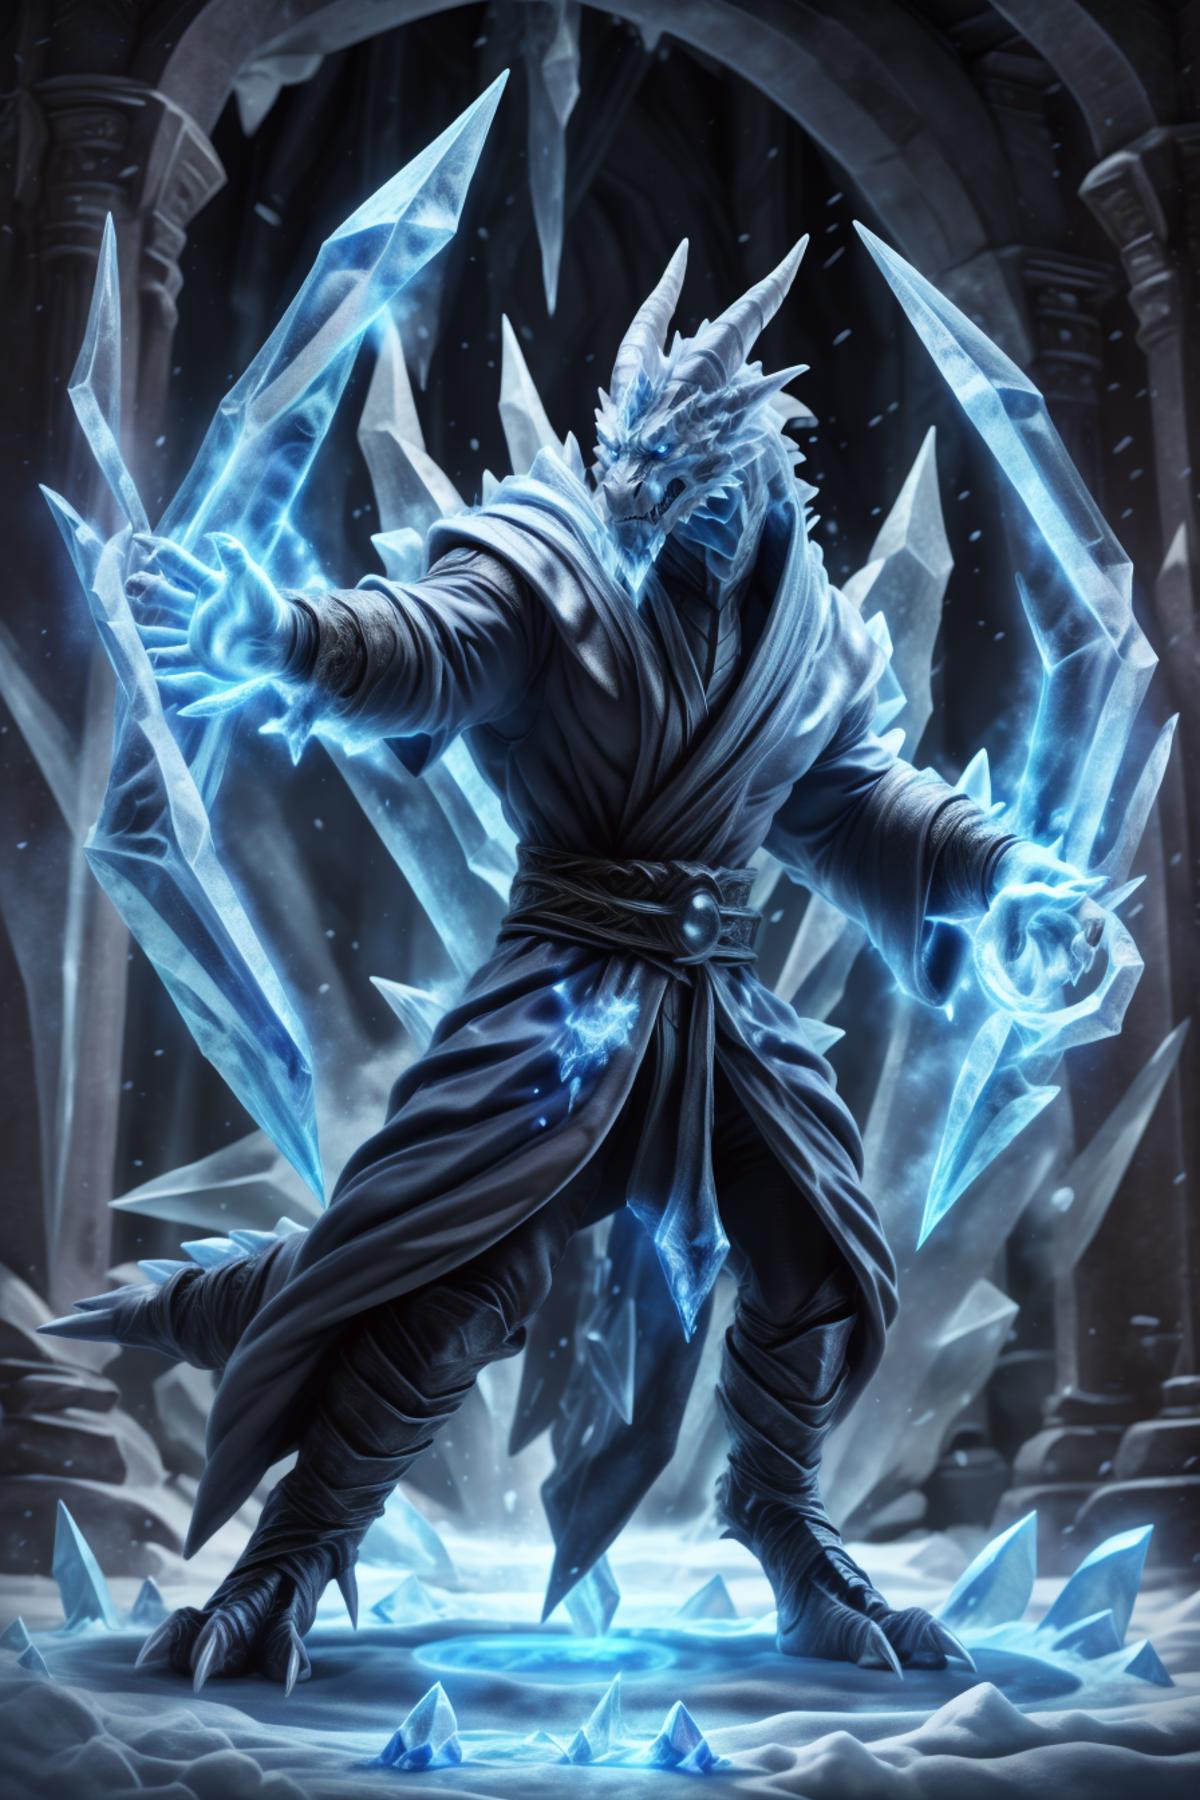 Cryomancer image by SphingOwOsin